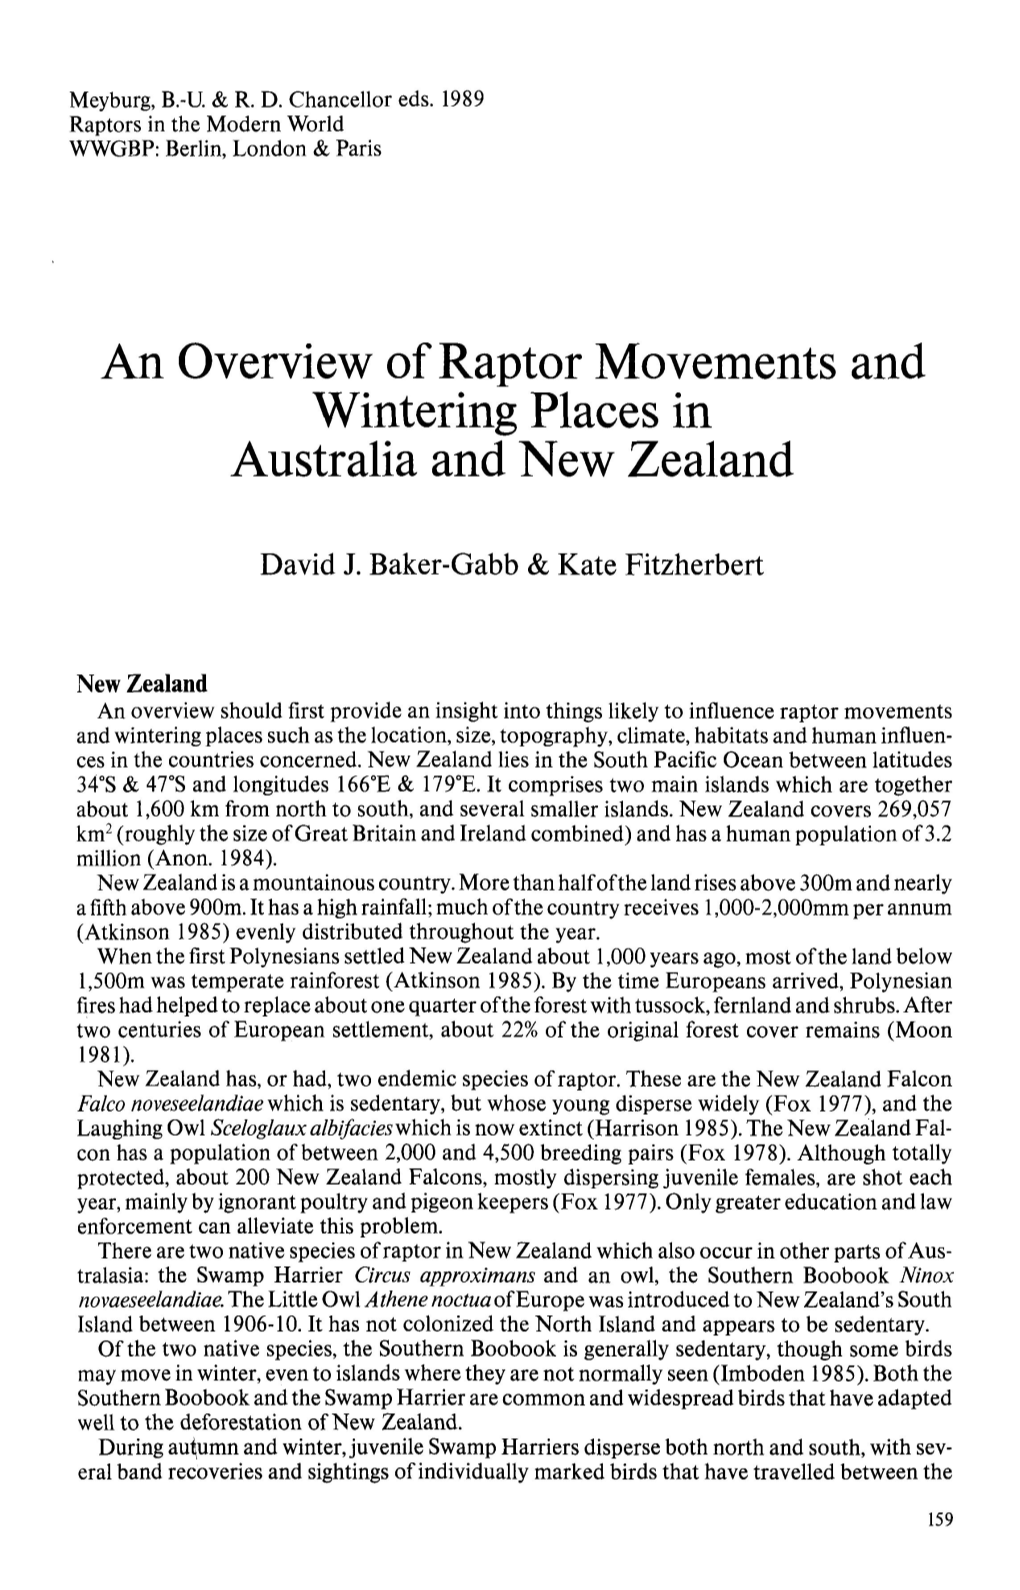 An Overview of Raptor Movements and Wintering Places in Australia and New Zealand